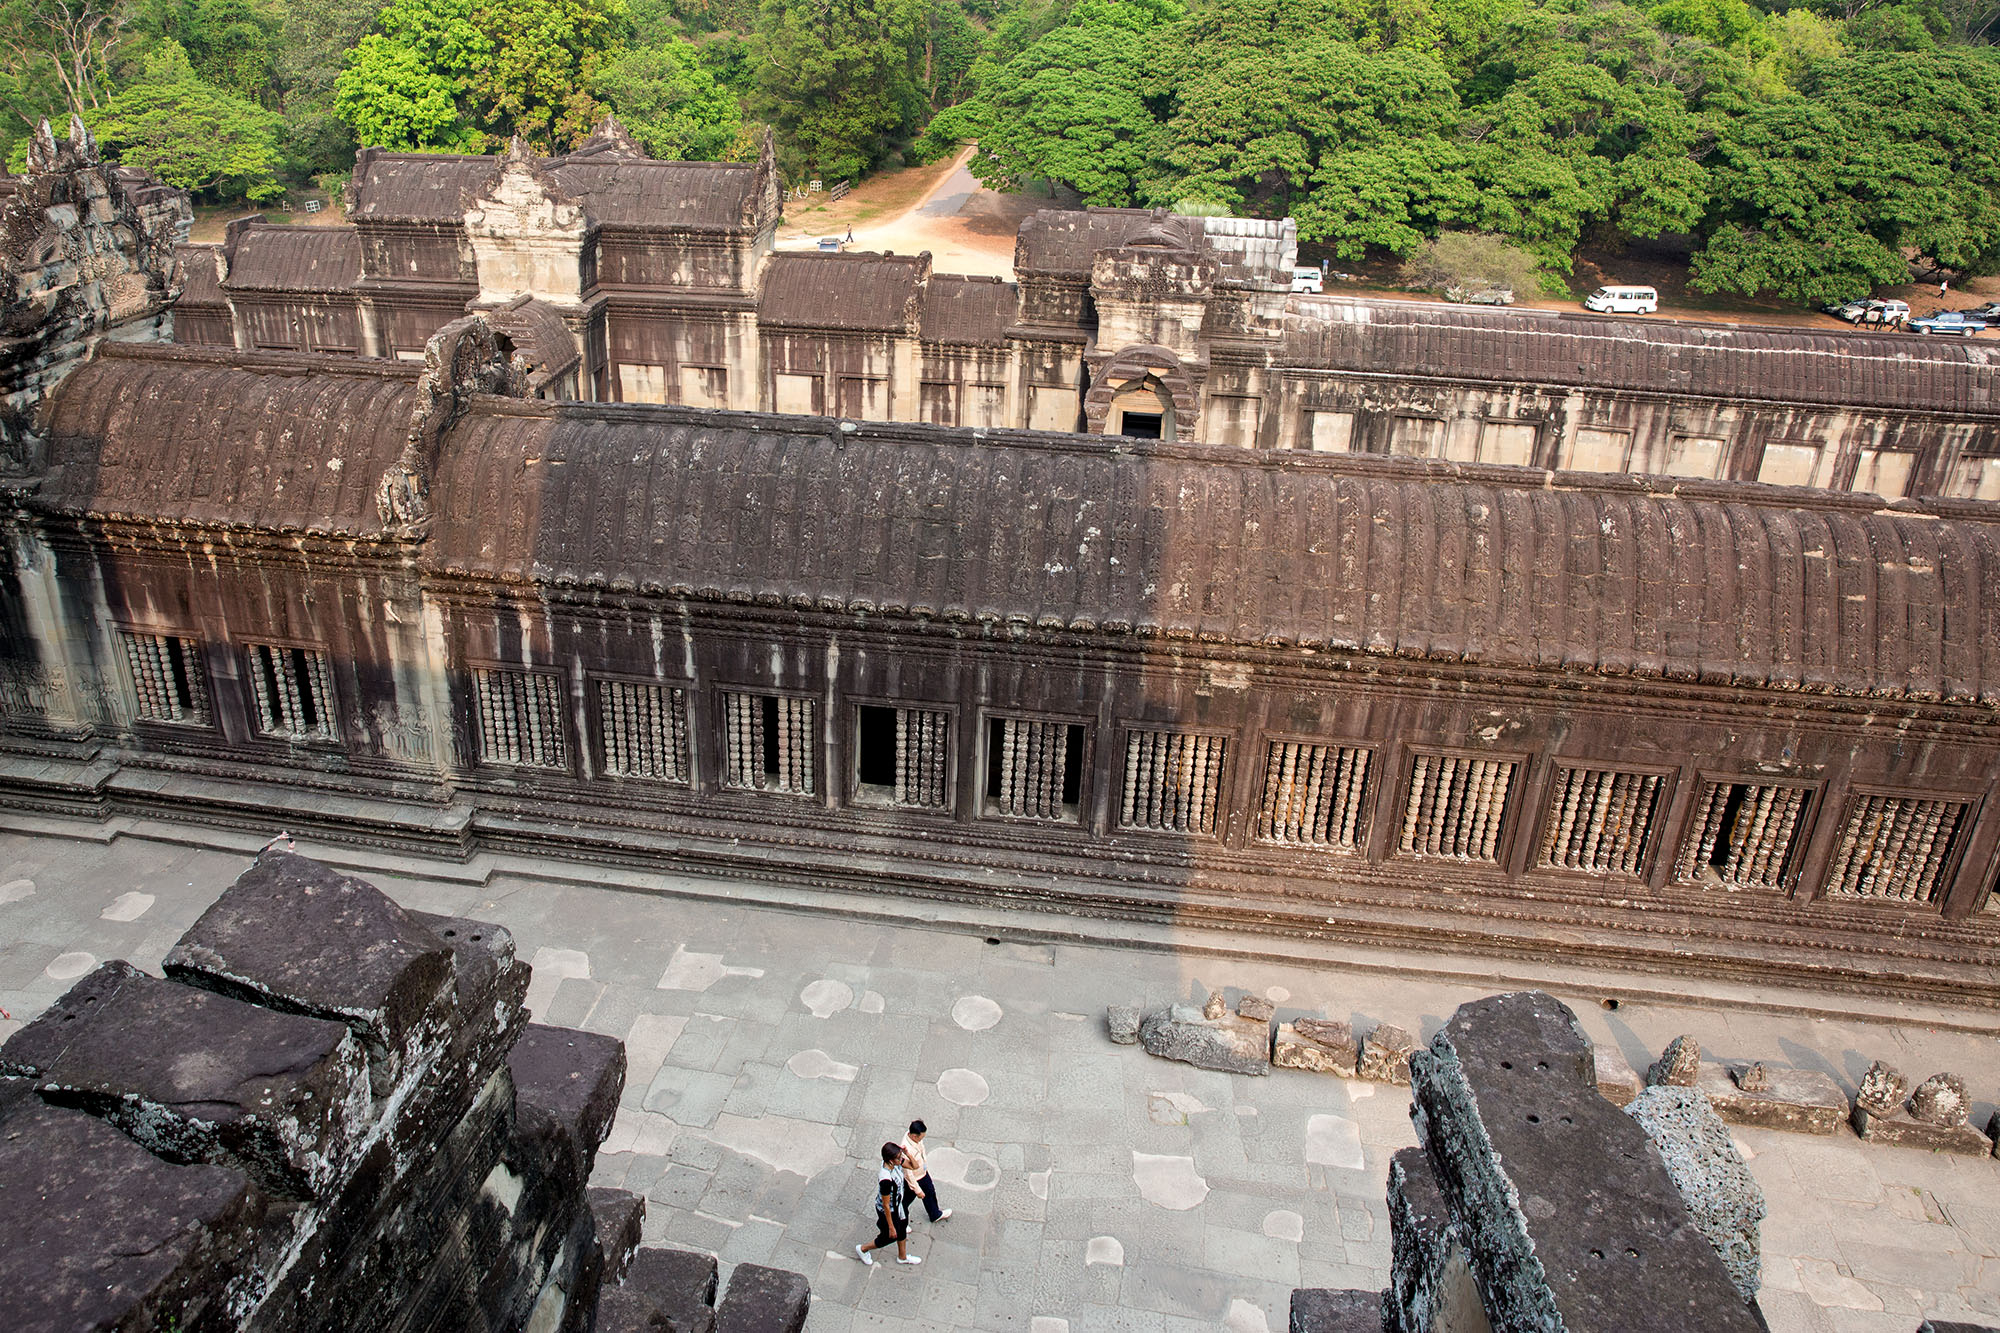 The First Lady concludes her tour of Angkor Wat. (Official White House Photo by Amanda Lucidon)